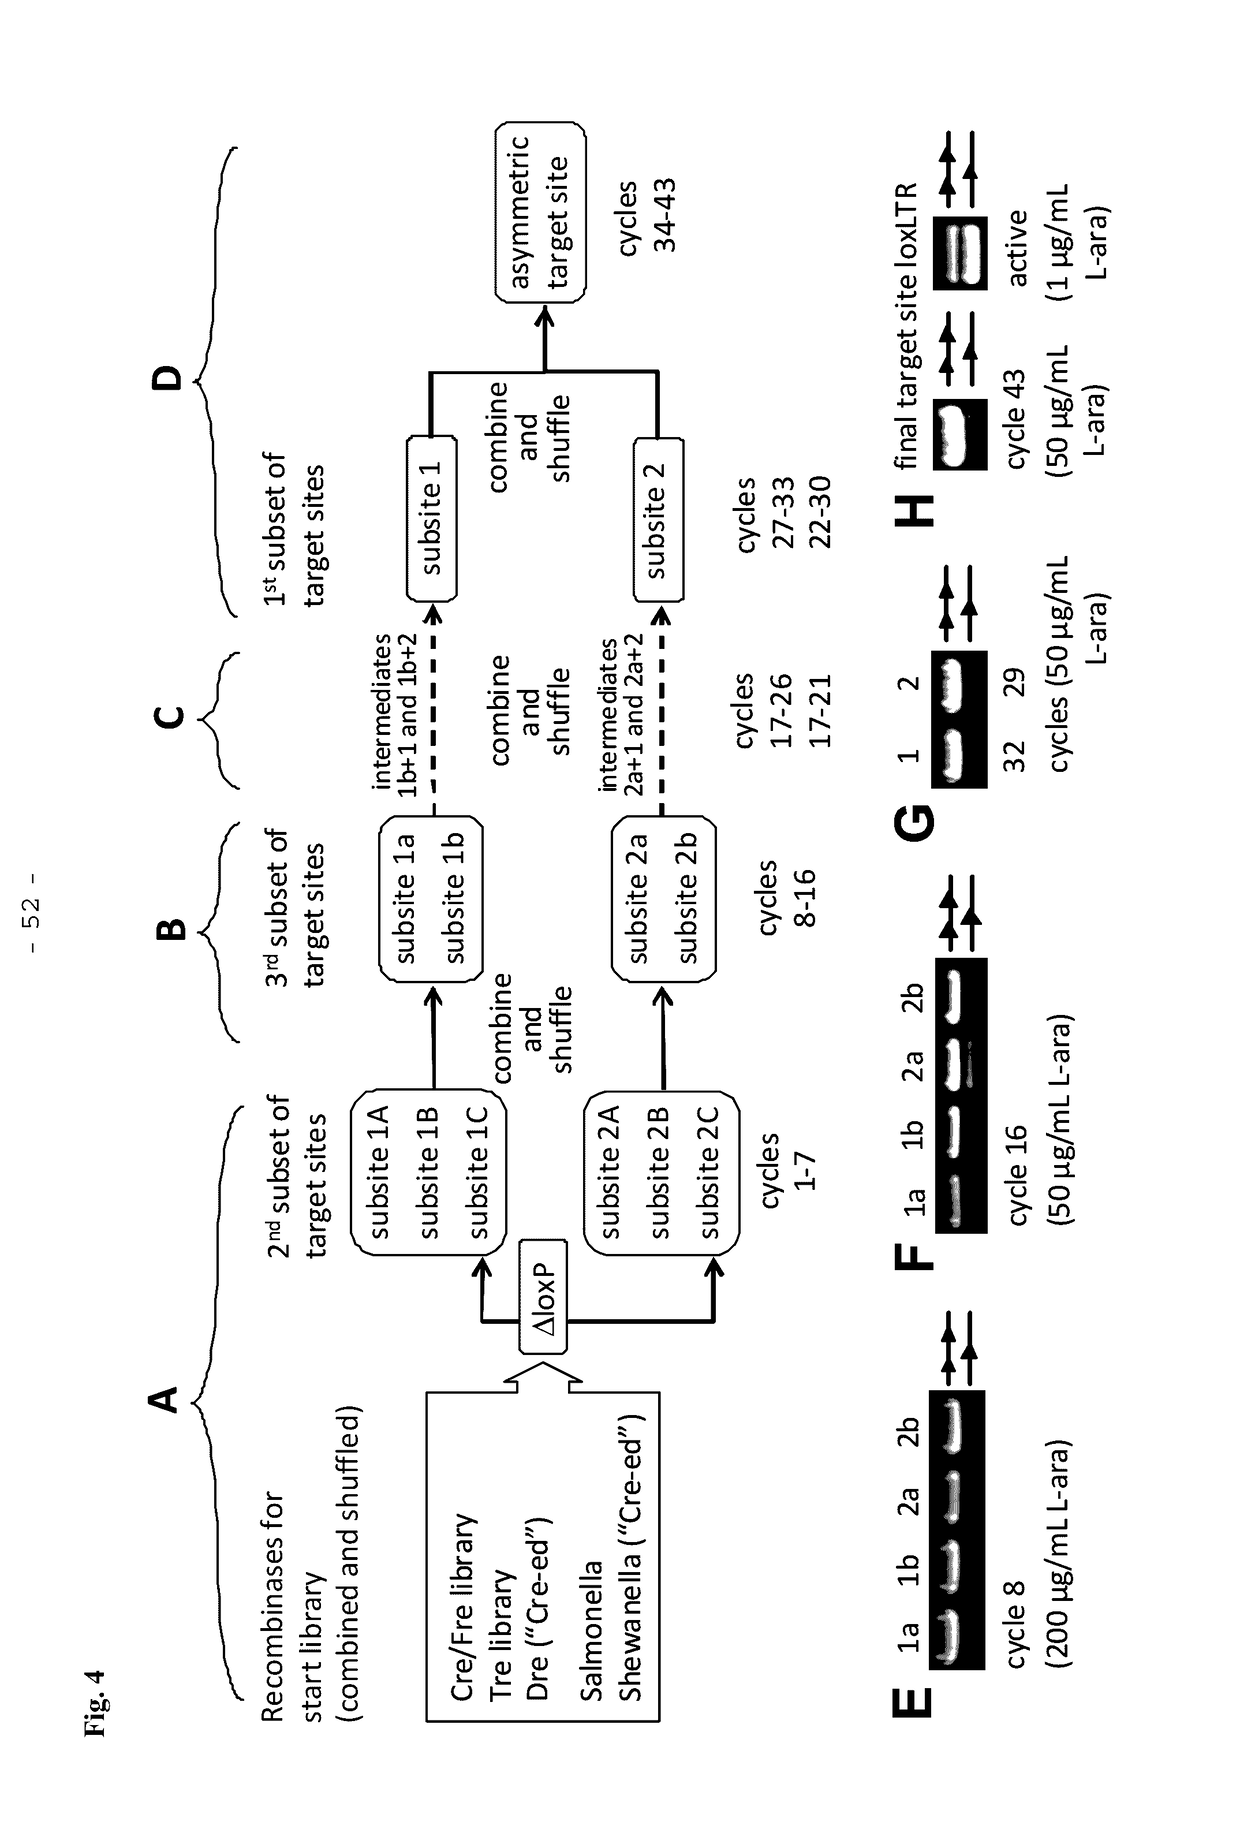 Tailored recombinase for recombining asymmetric target sites in a plurality of retrovirus strains